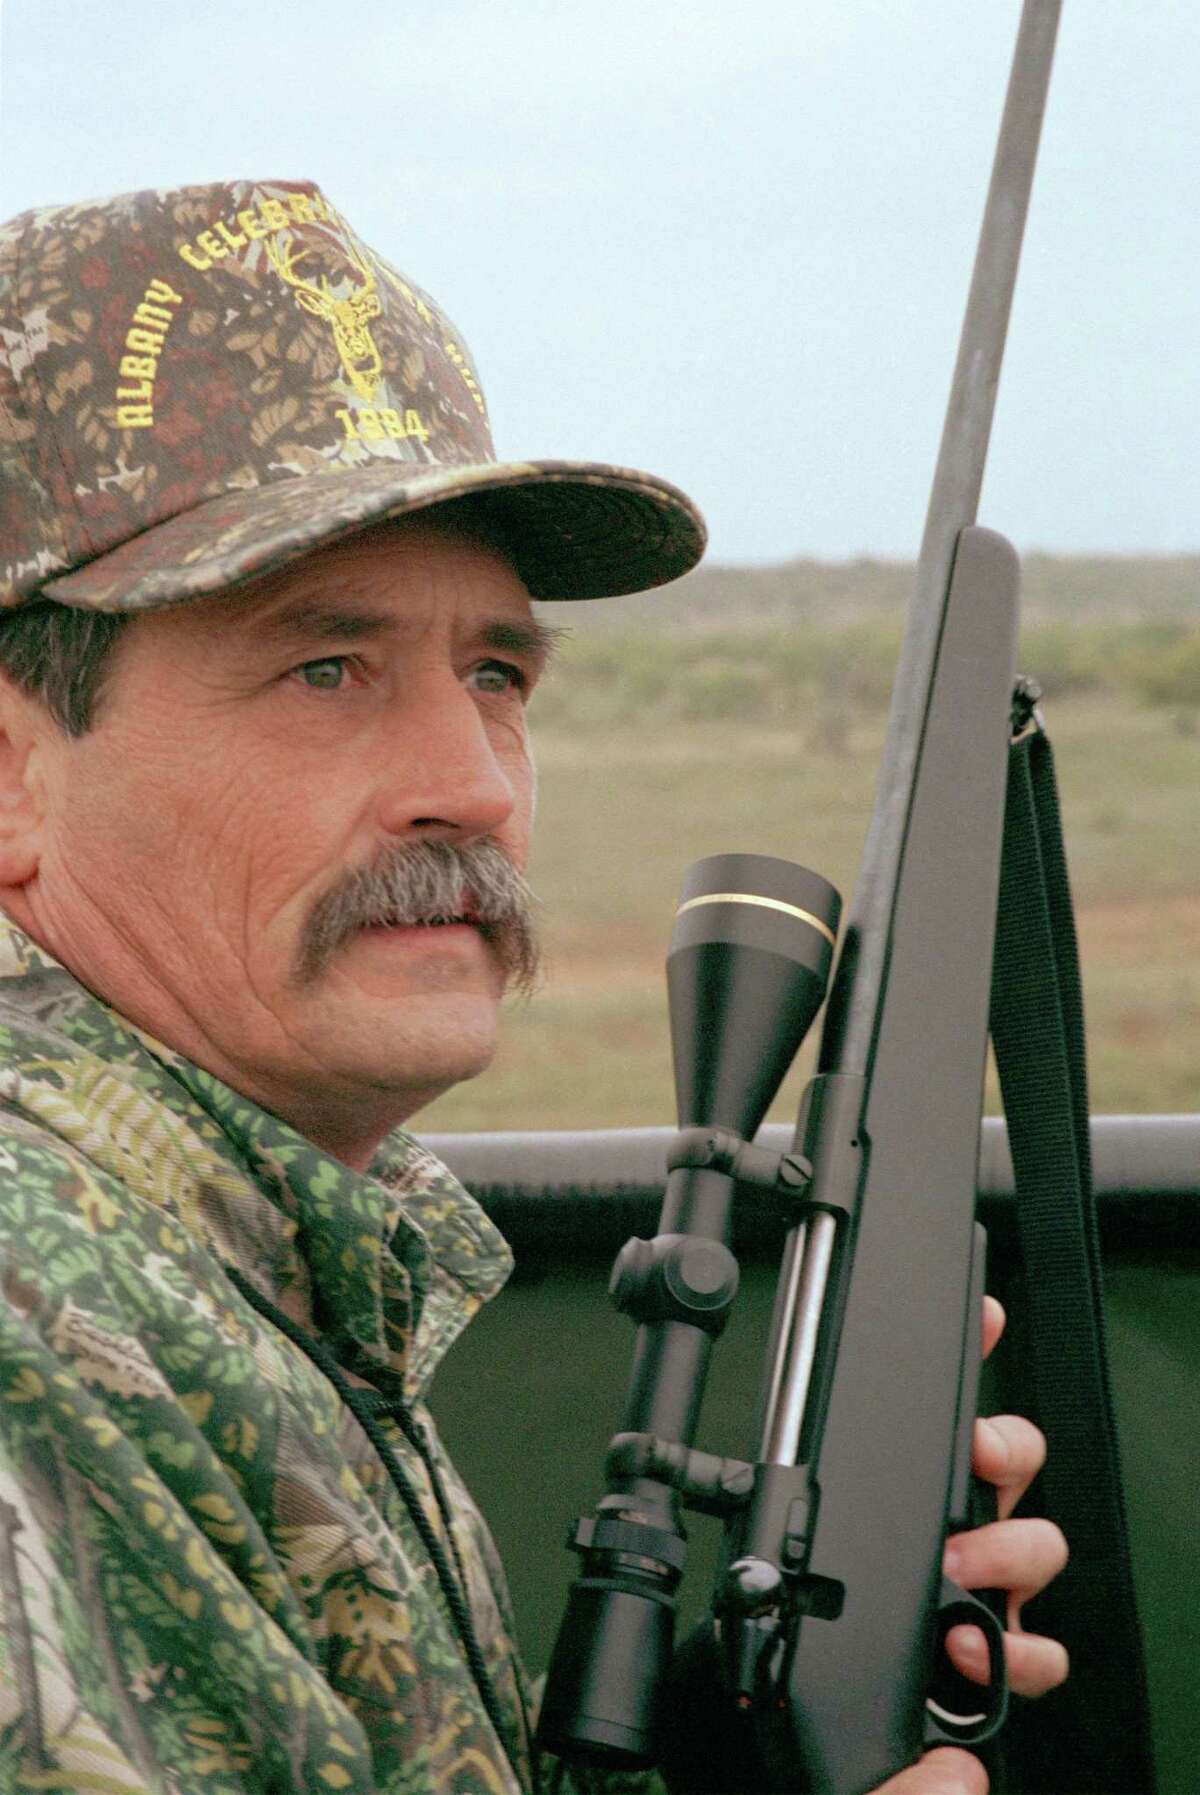 deer hunter with rifle. HOUCHRON CAPTION (10/17/2002): The scoped-action rifle is the overwhelming choice among veteran Texas deer hunters. Note the locked bolt raised into the half-cocked position to serve as visible safety.